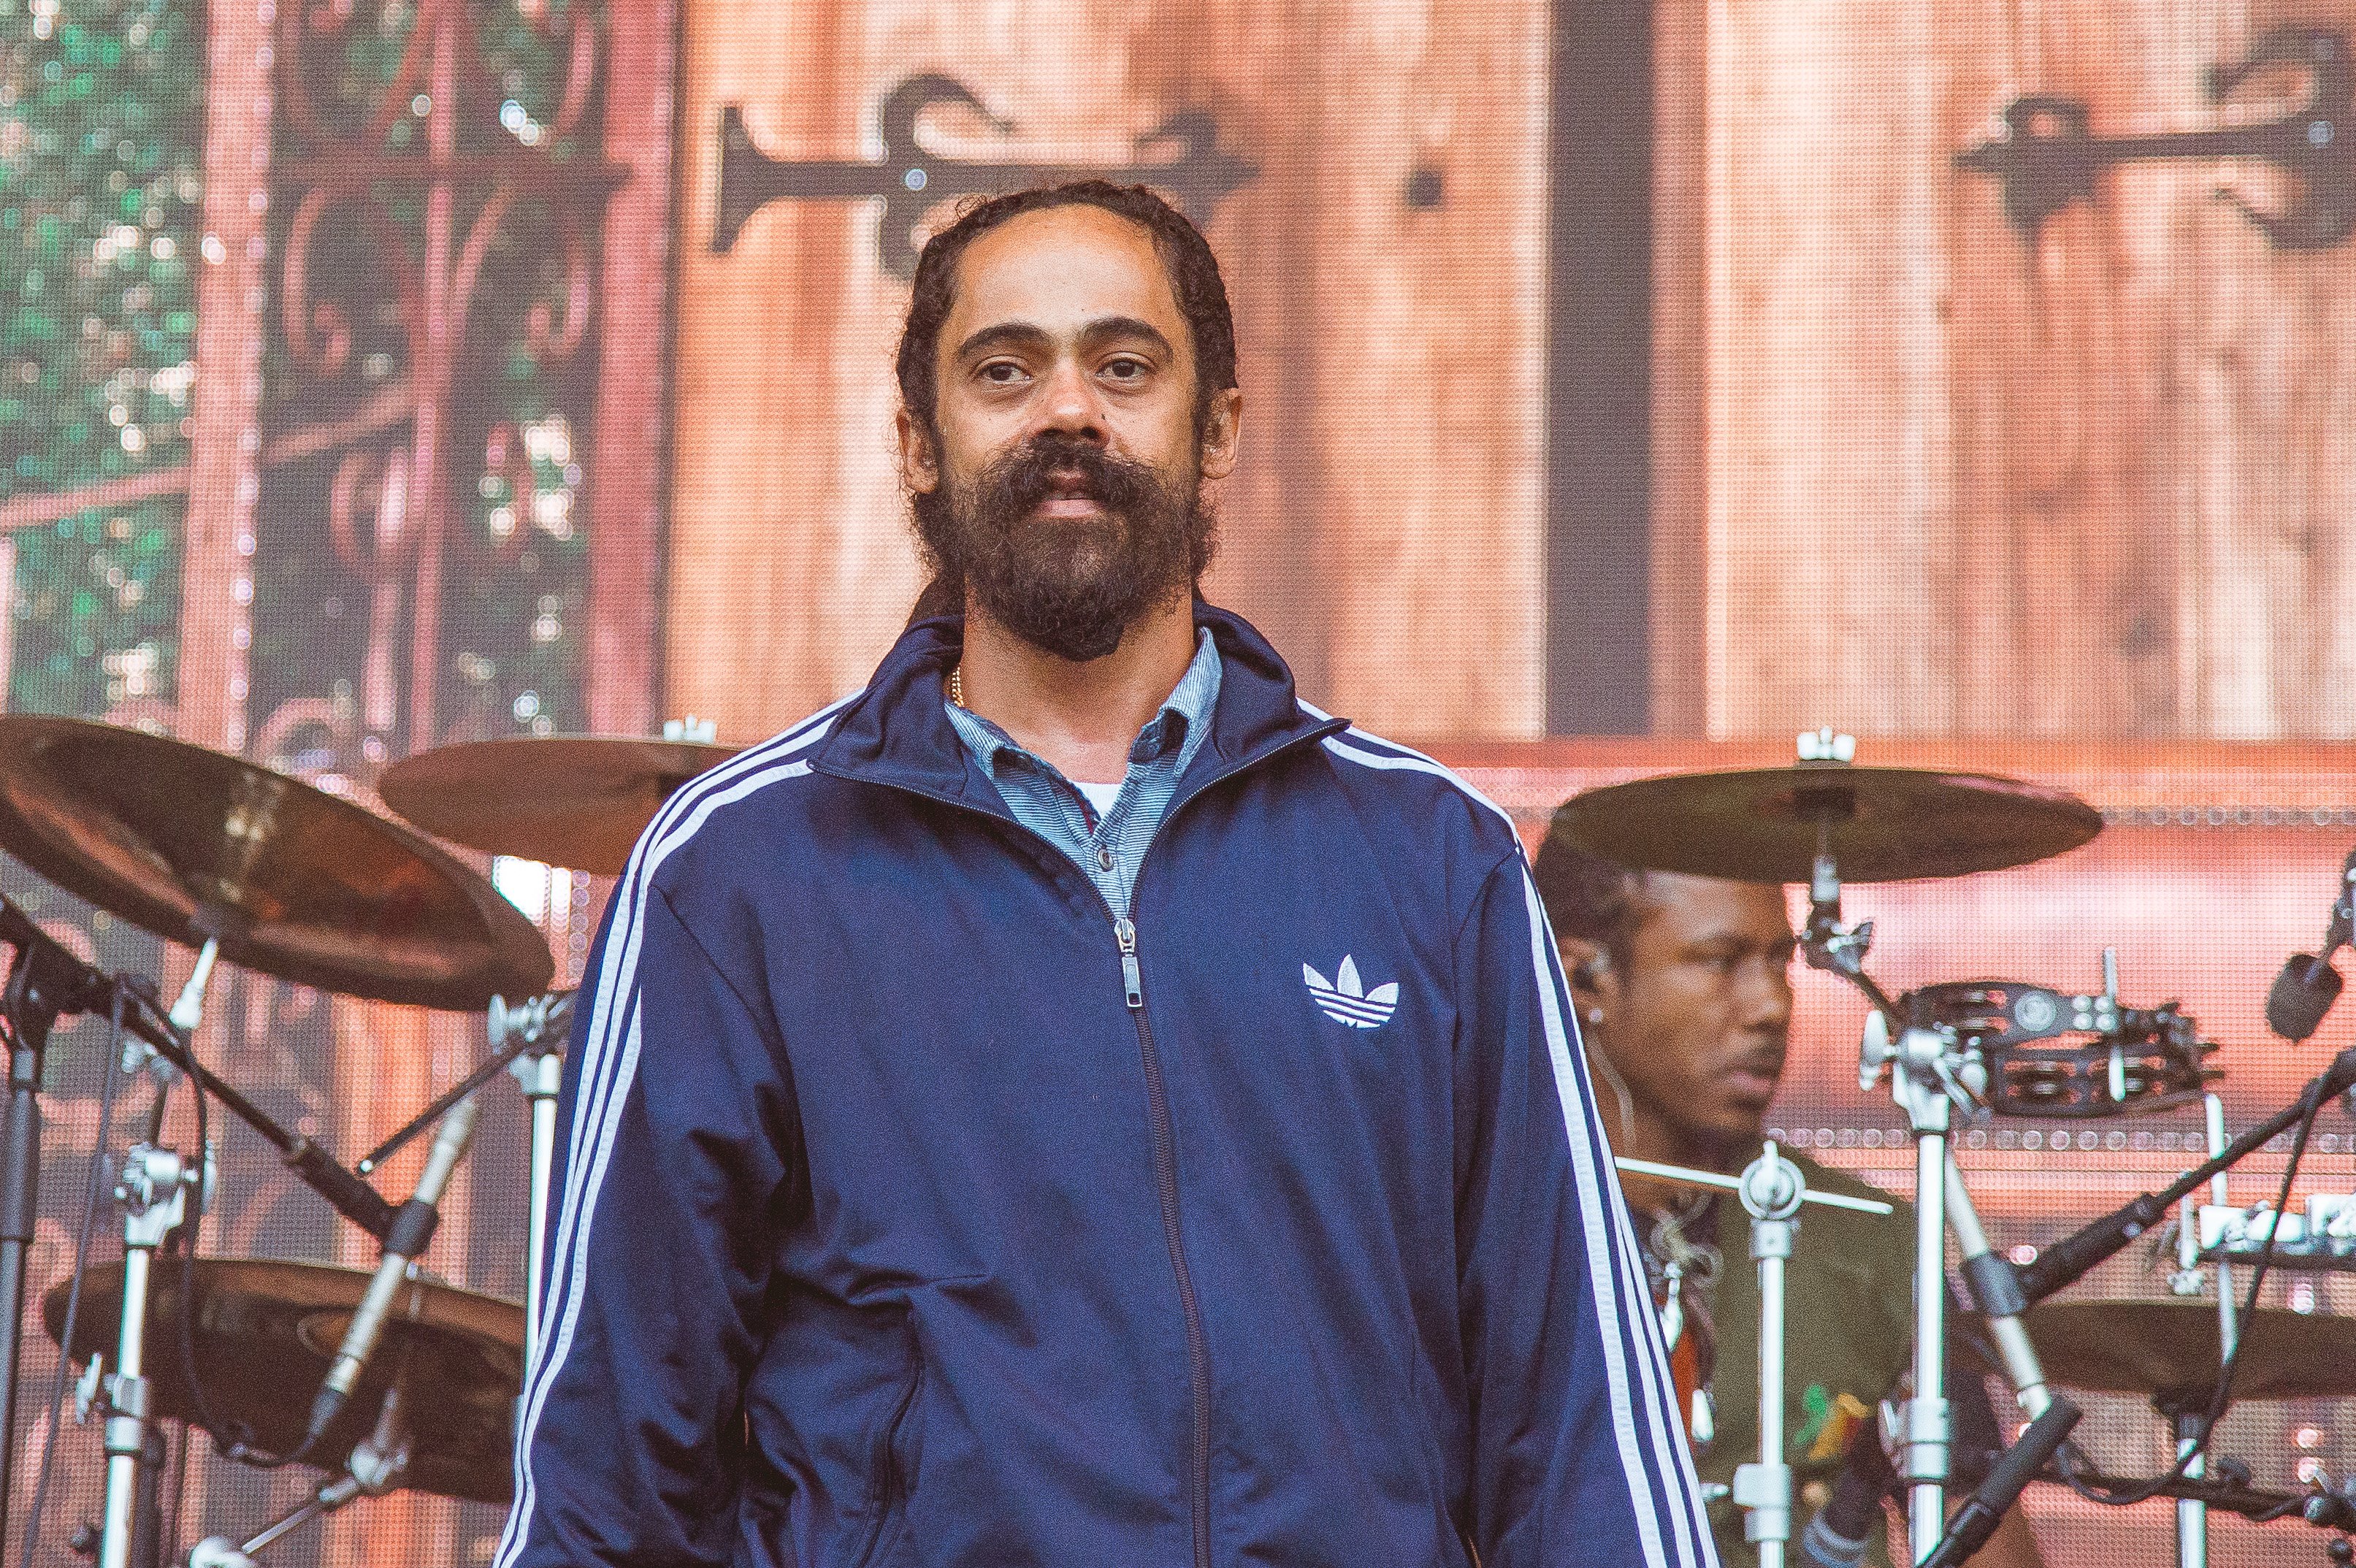 Damian Marley on stage at The Ends festival on June 02, 2019 | Source: Getty Images